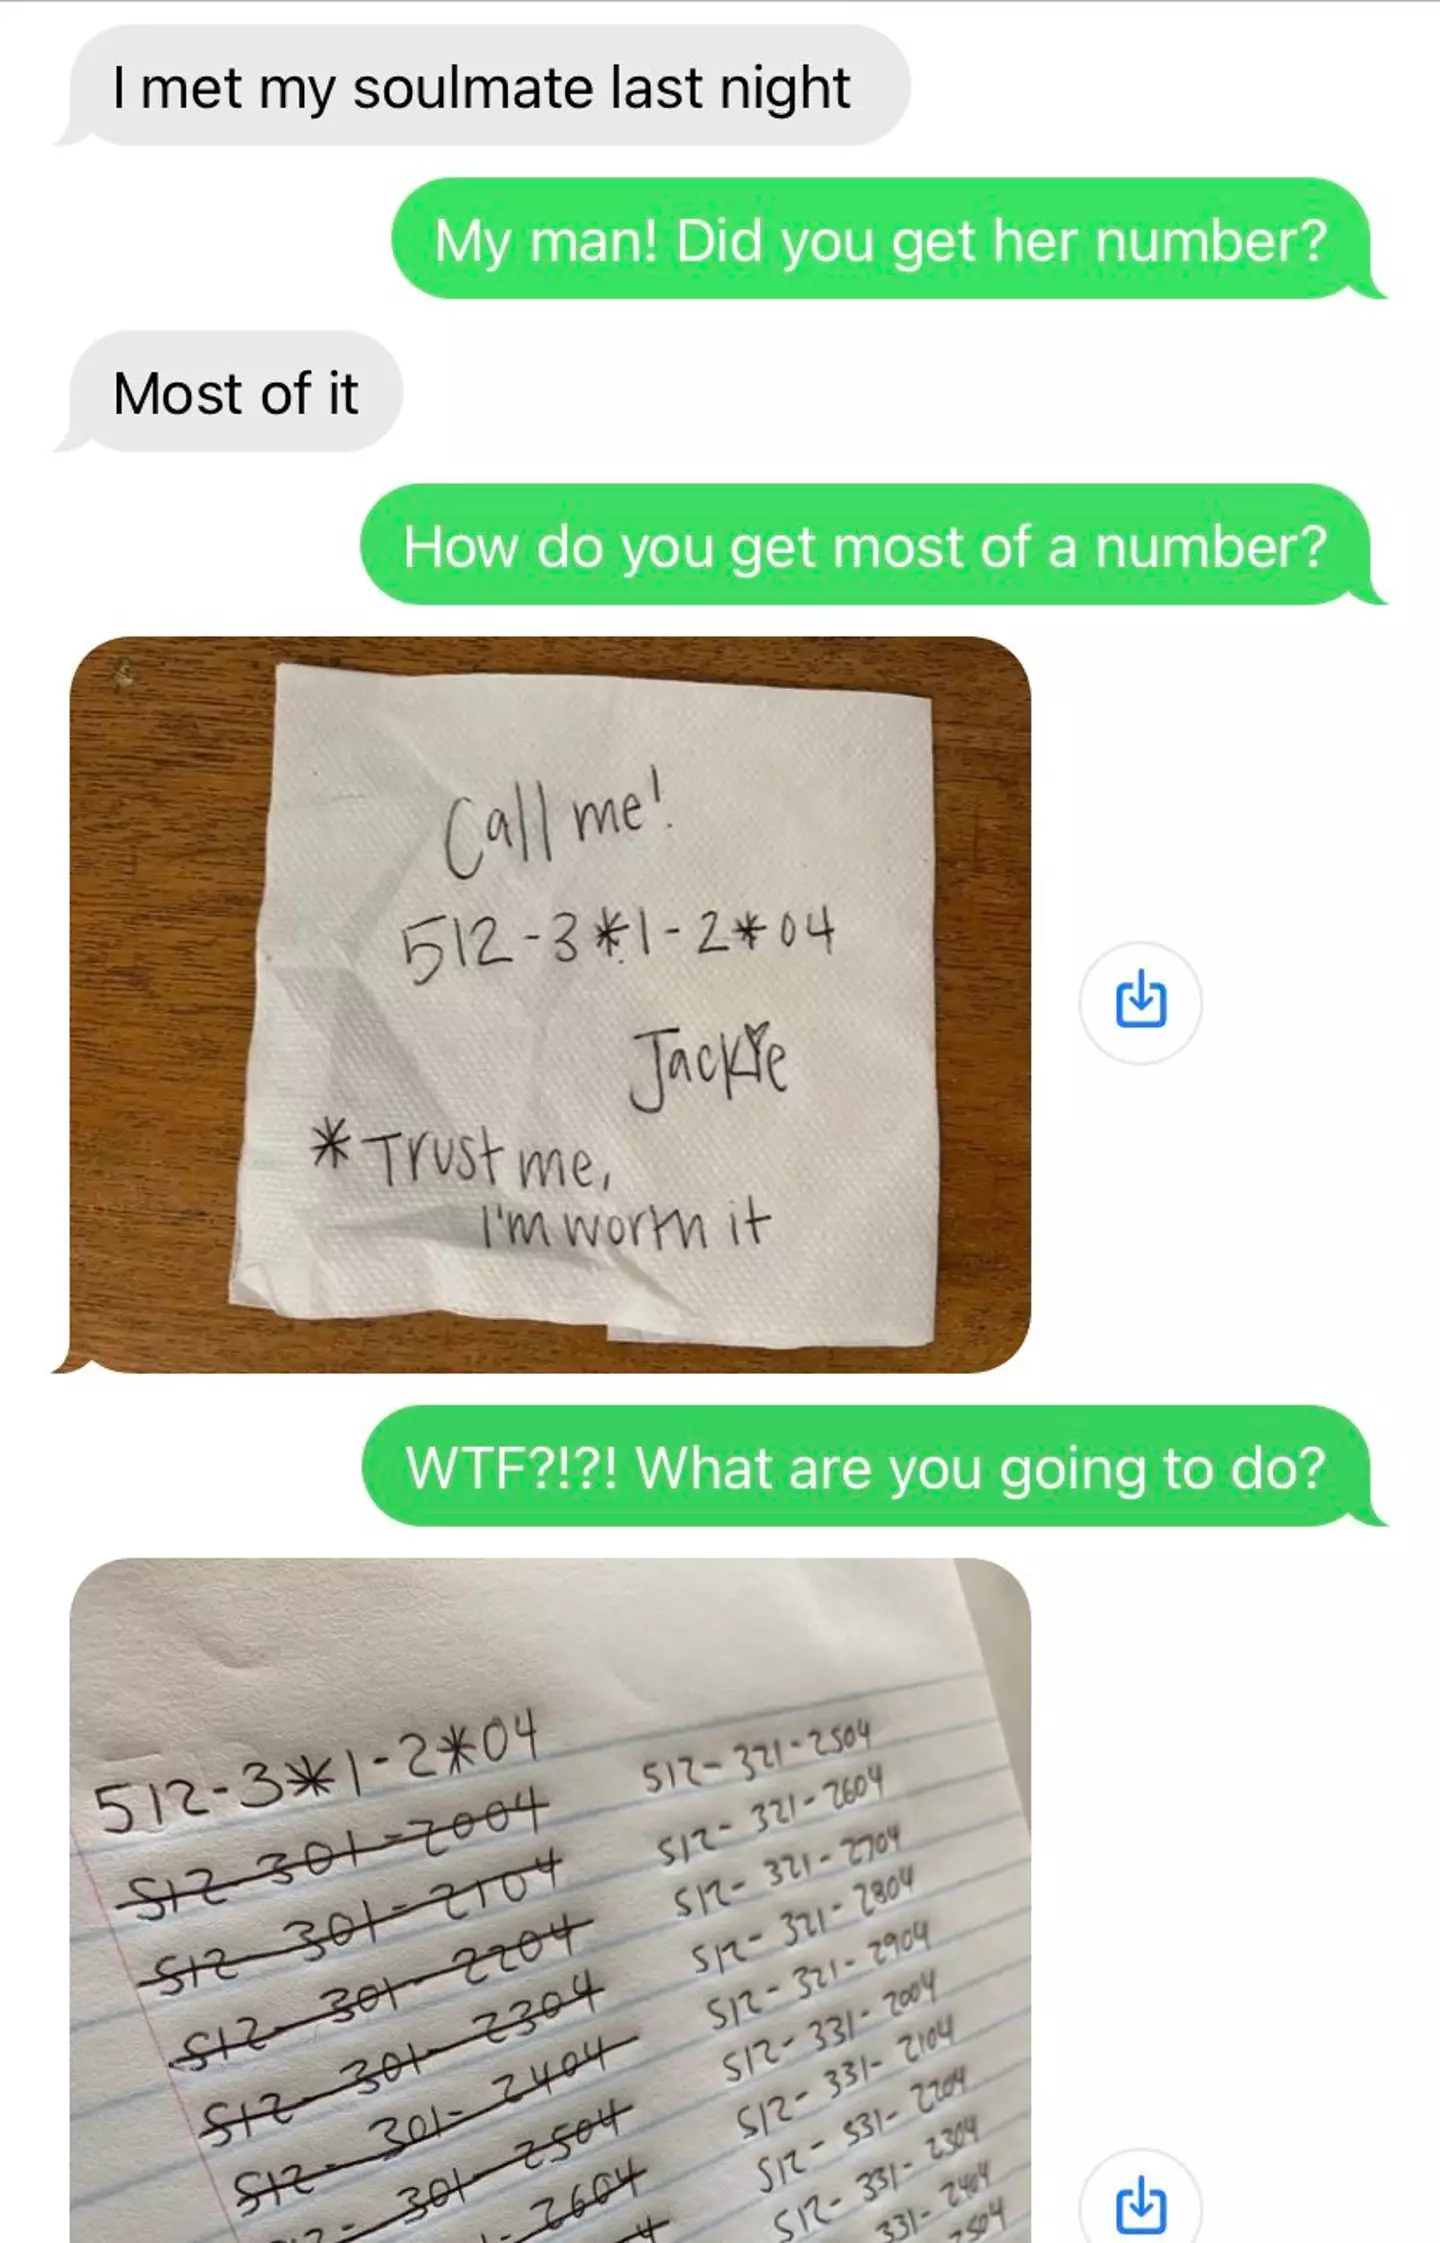 The cousin got "most of" the number.